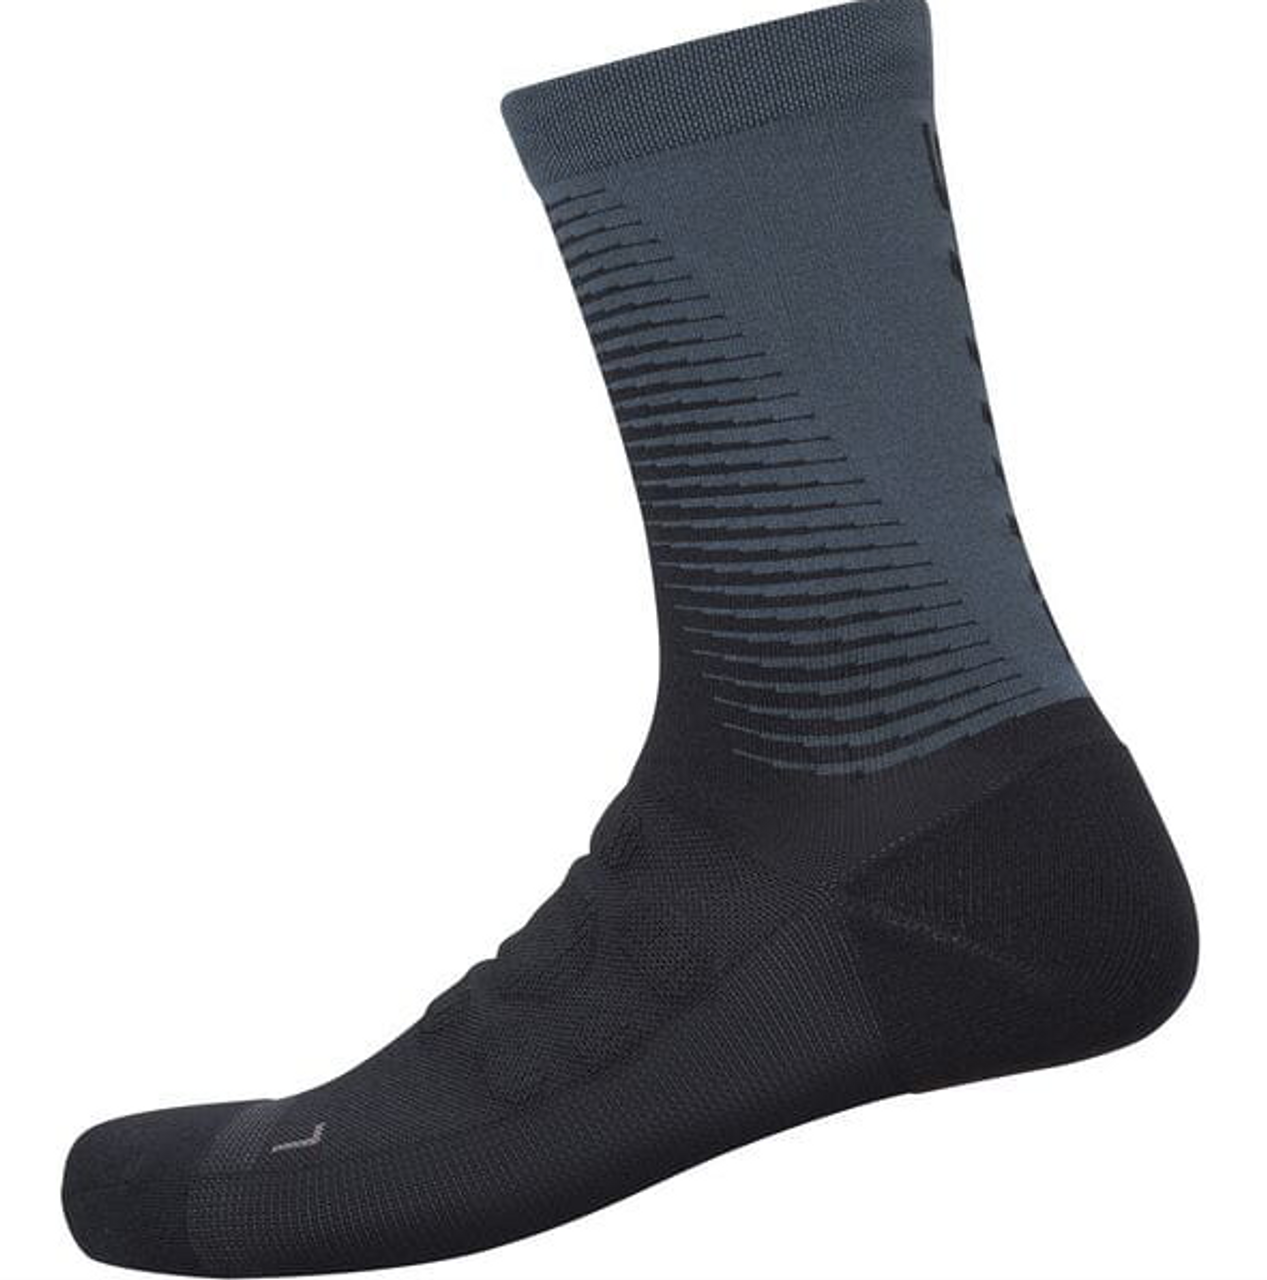 Shimano S-PHYRE Tall Socks In Black/Grey All Sizes